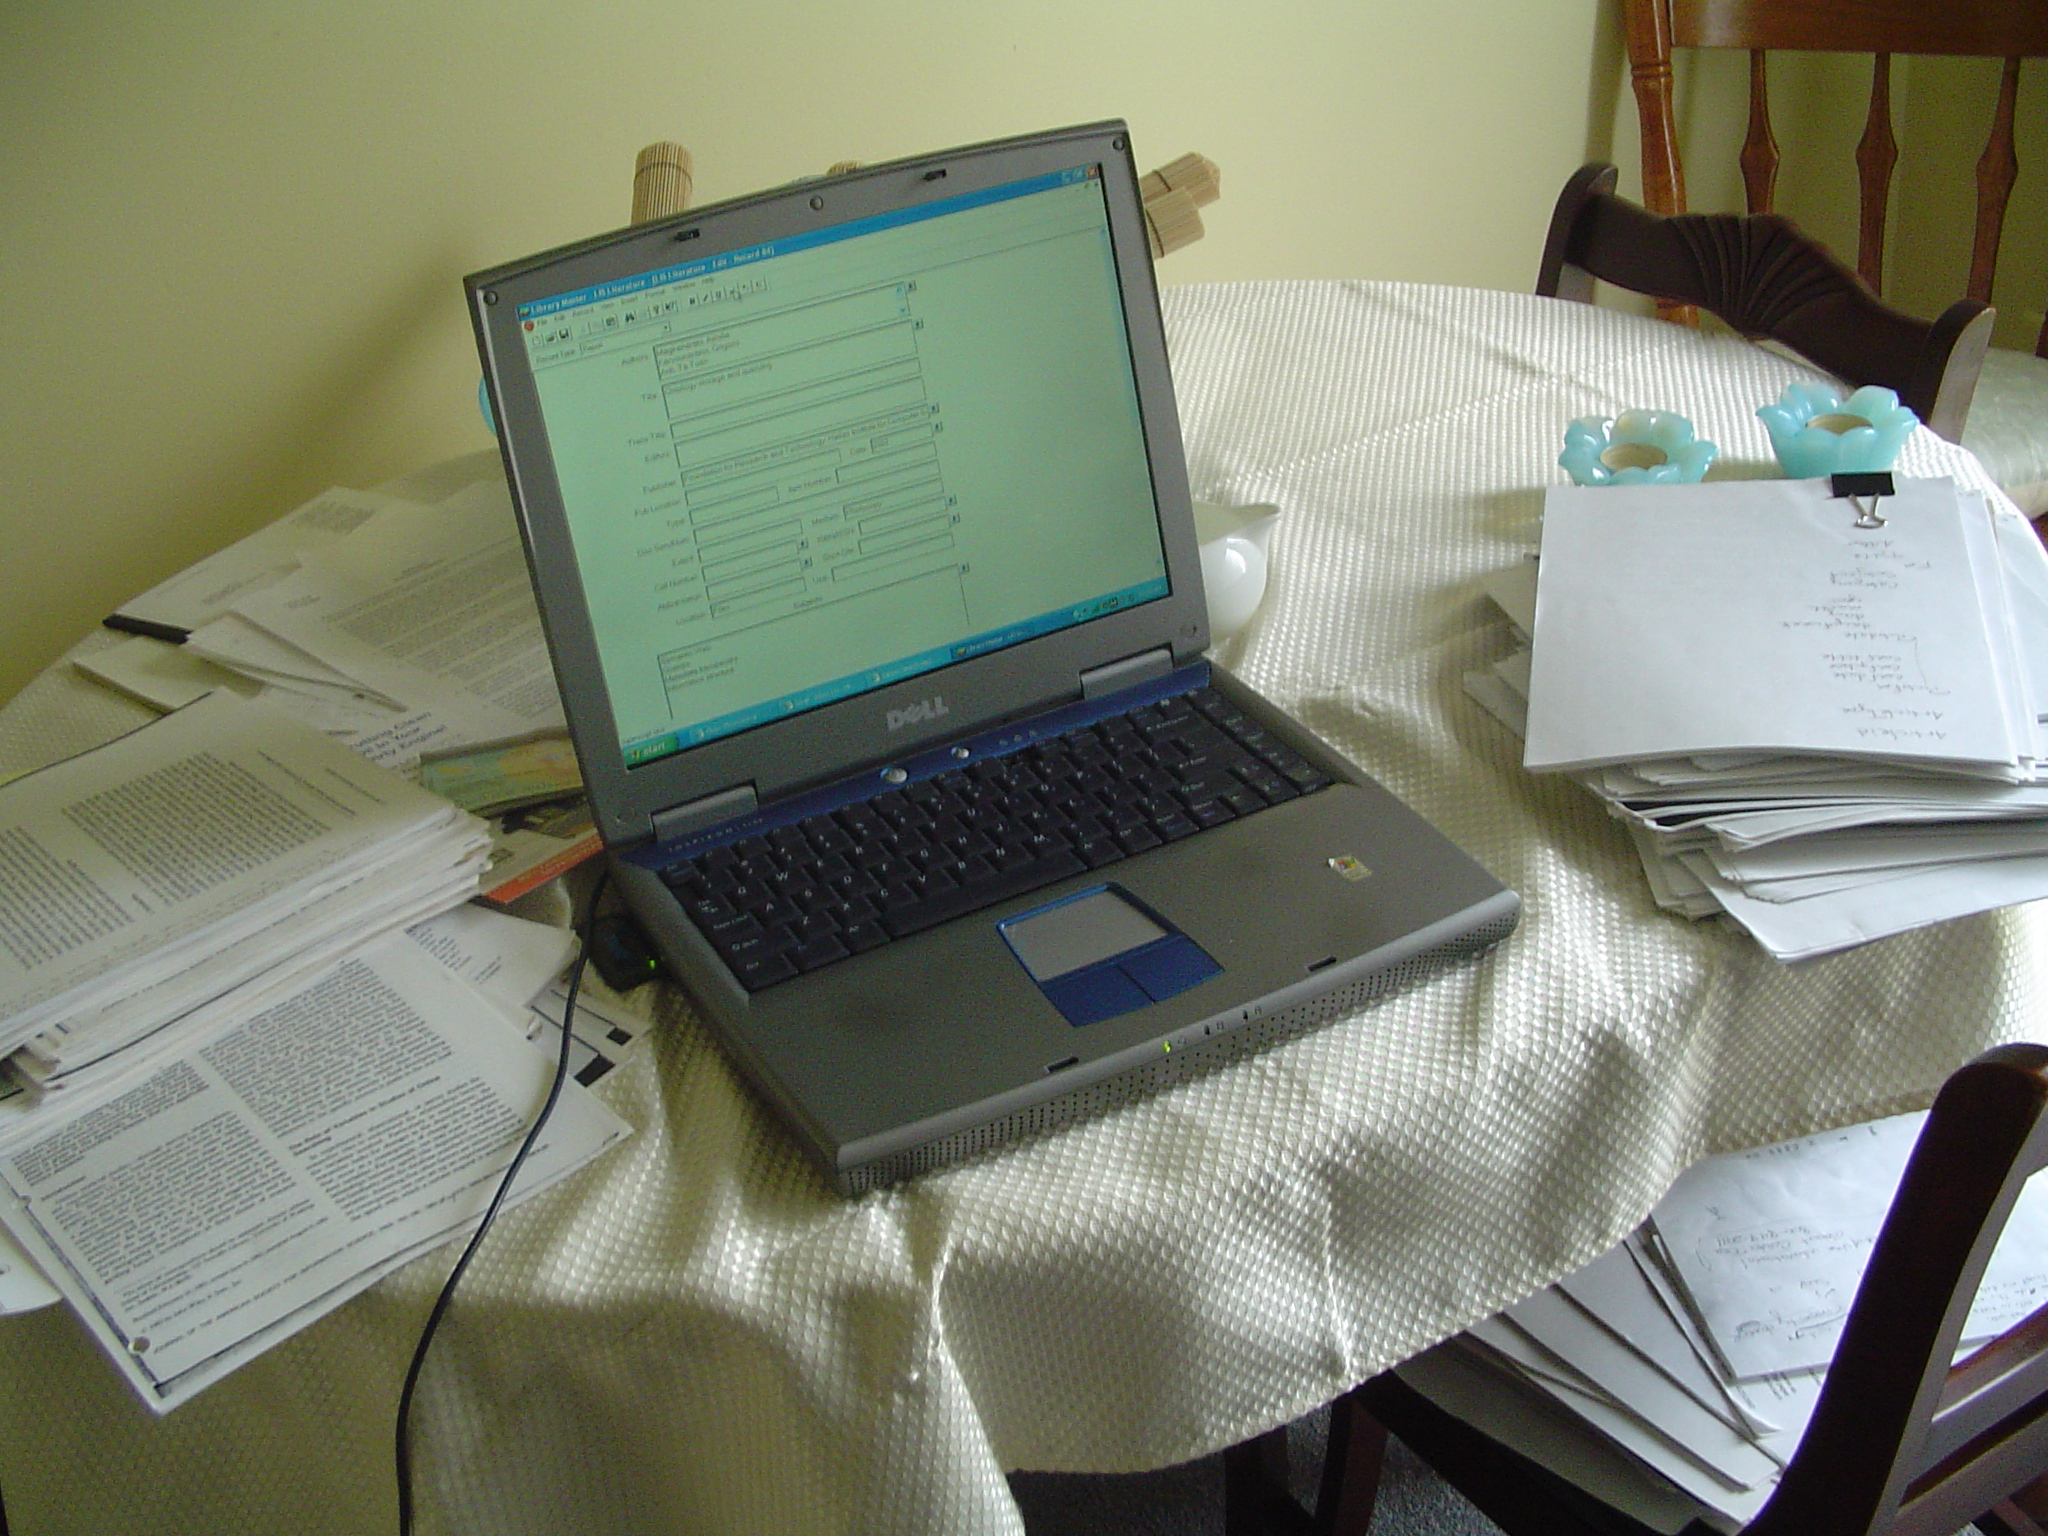 a laptop is on a table that contains books and papers